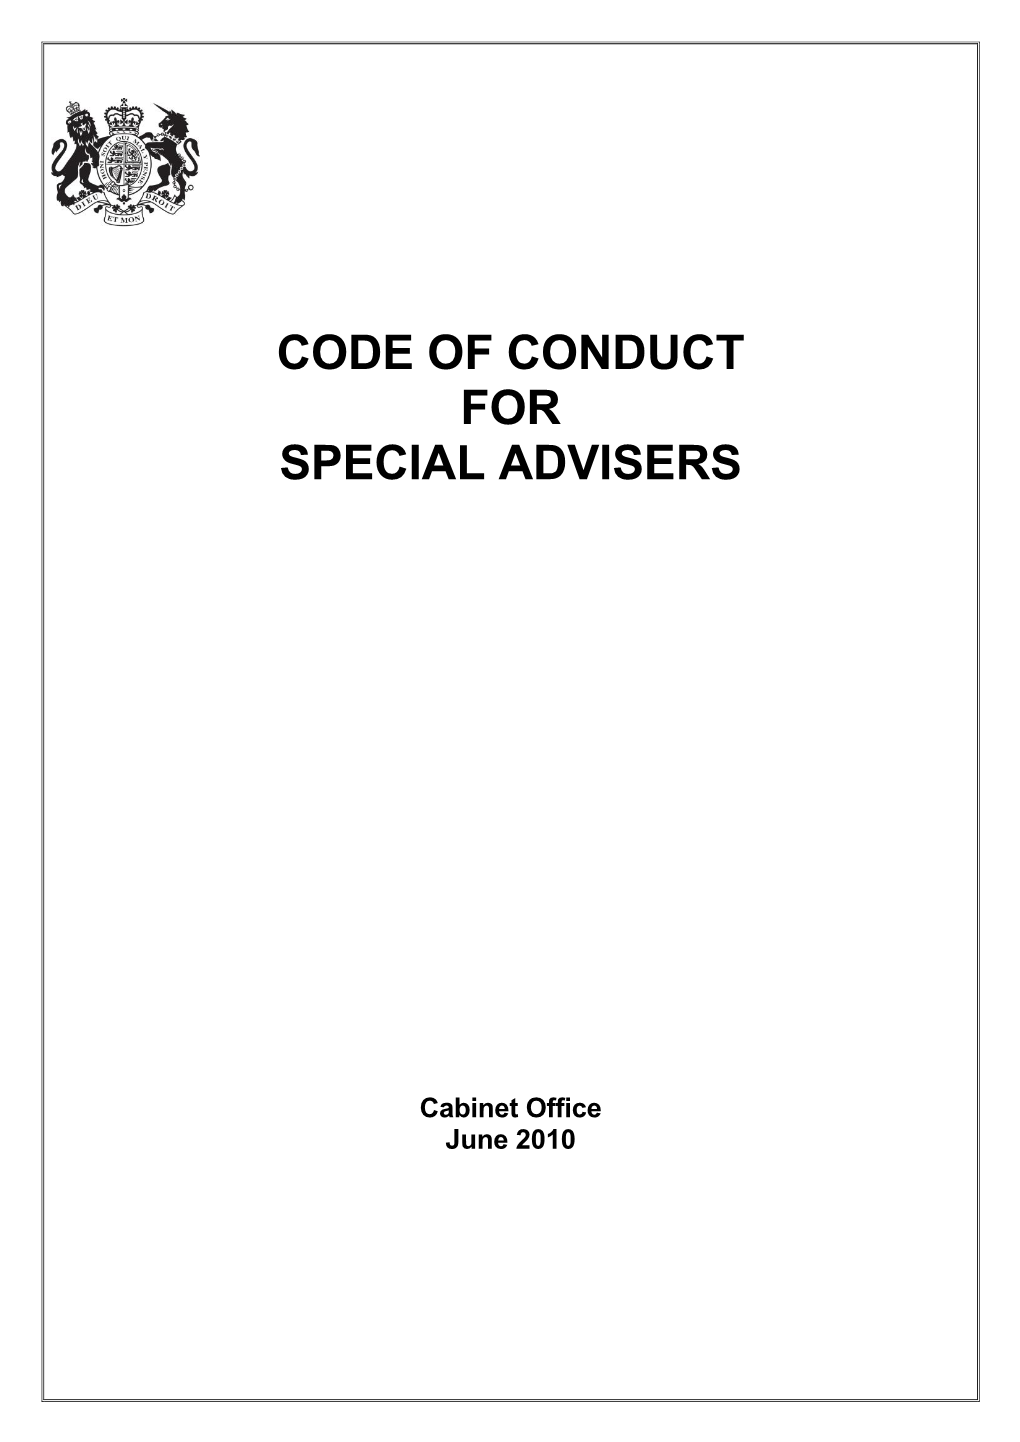 Code of Conduct for Special Advisers